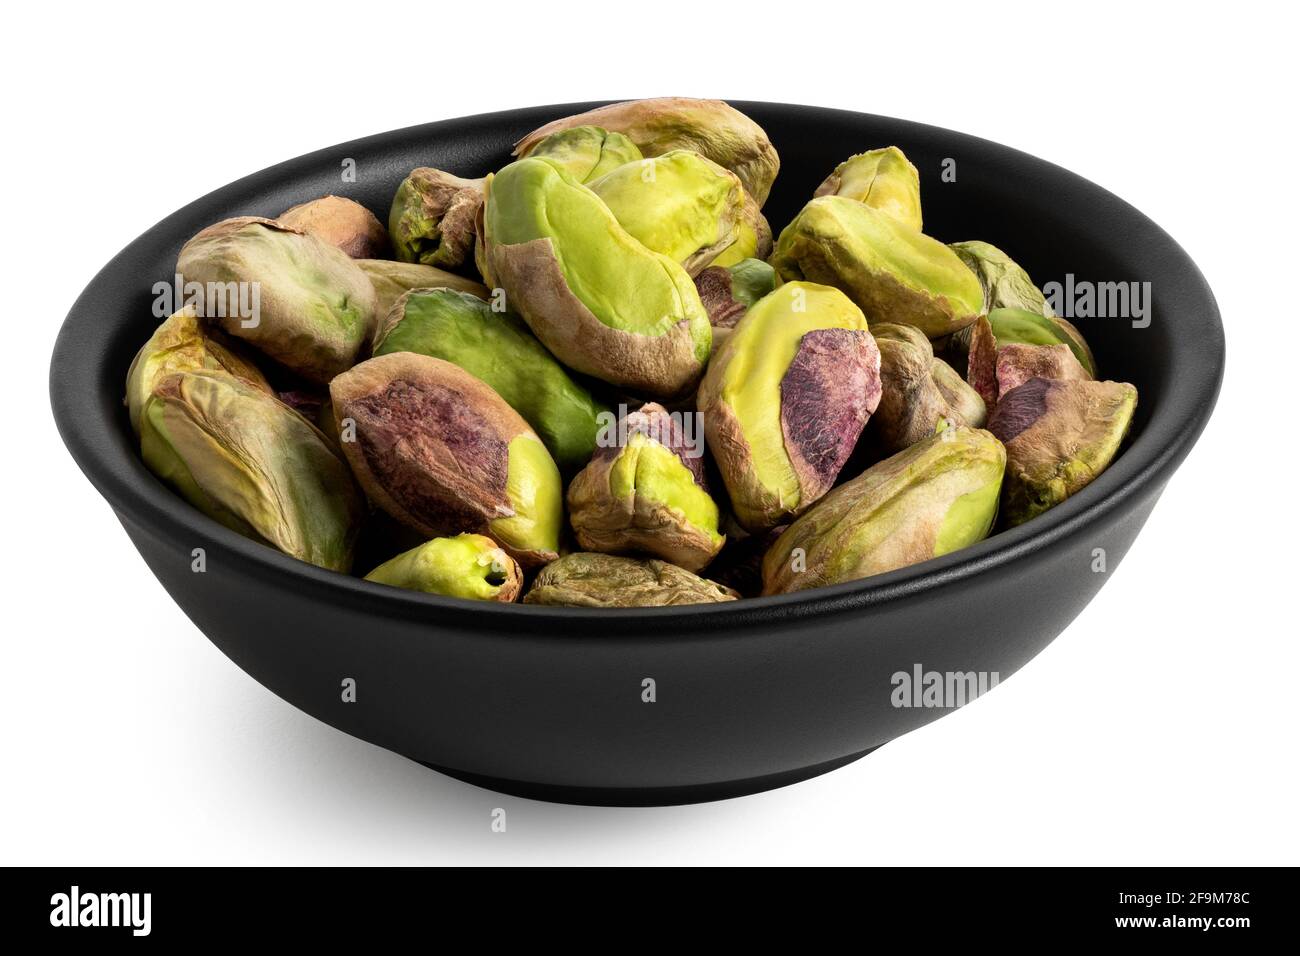 Shelled pistachios in a black ceramic bowl isolated on white. Stock Photo